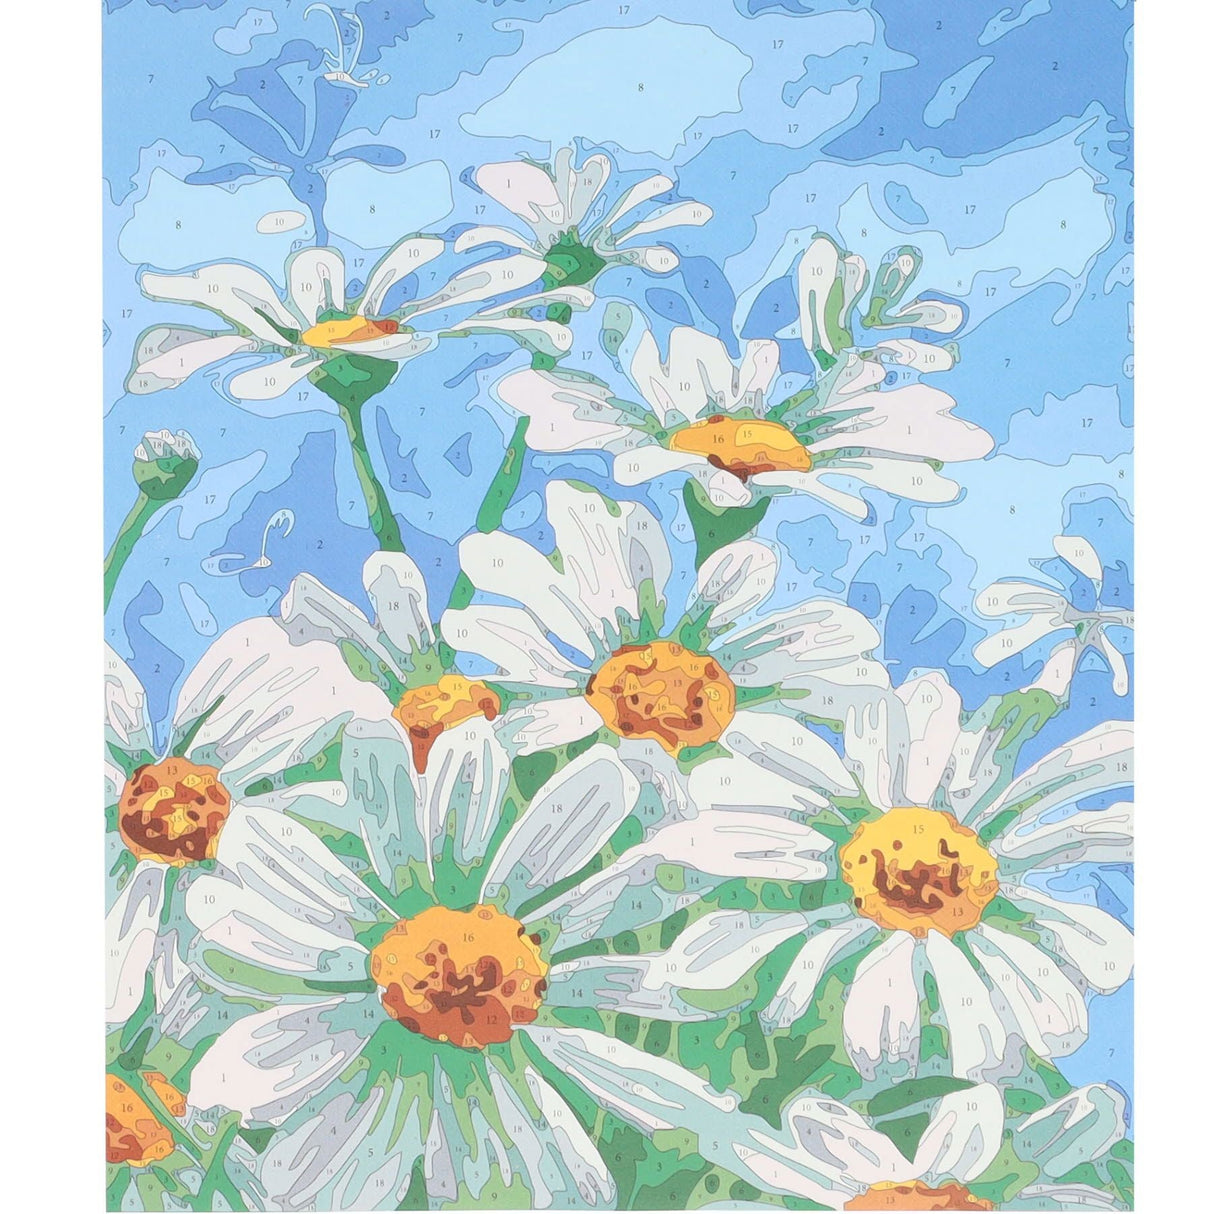 Icon Paint By Numbers Canvas - 300x250mm - Daisy Meadow-Colour-in Canvas-Icon|StationeryShop.co.uk